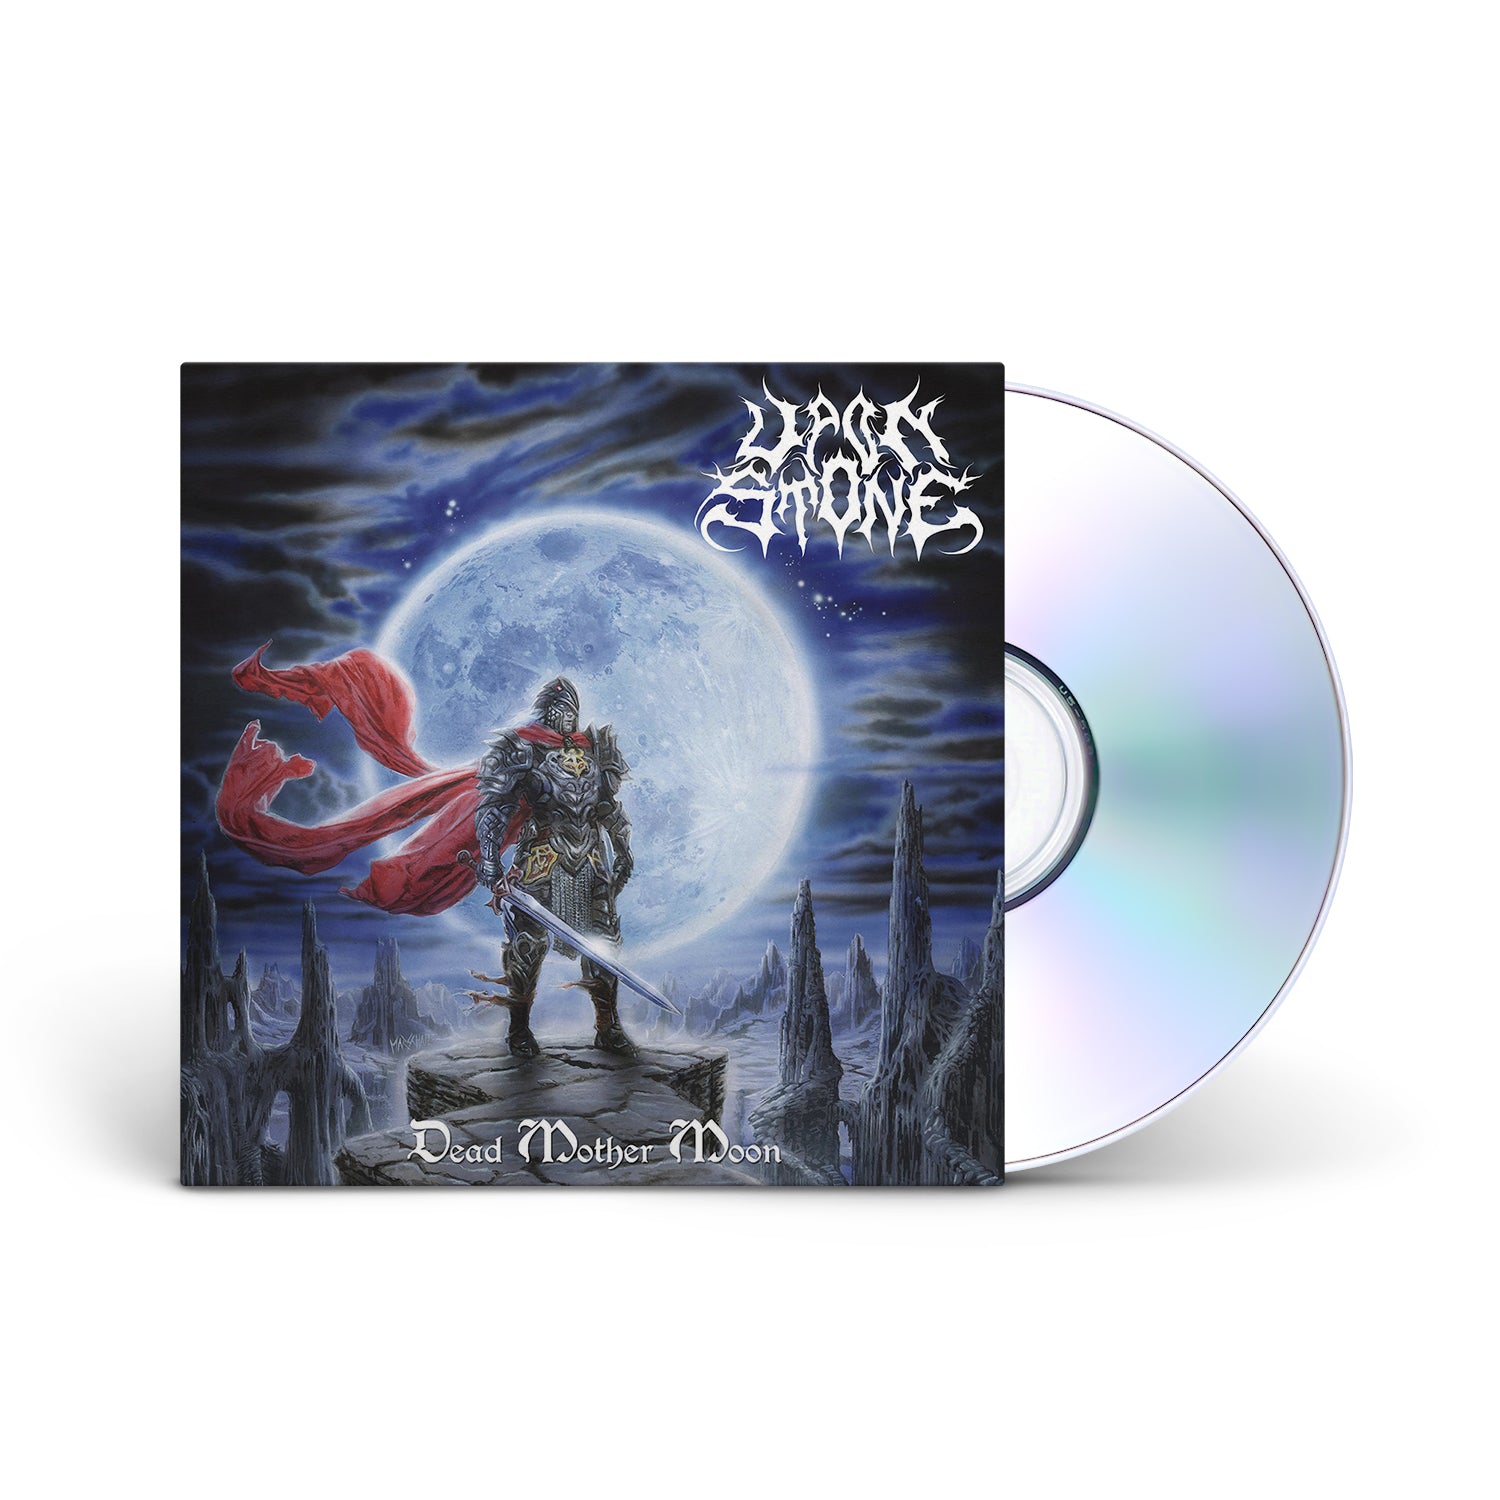 UPON STONE - Dead Mother Moon - CD